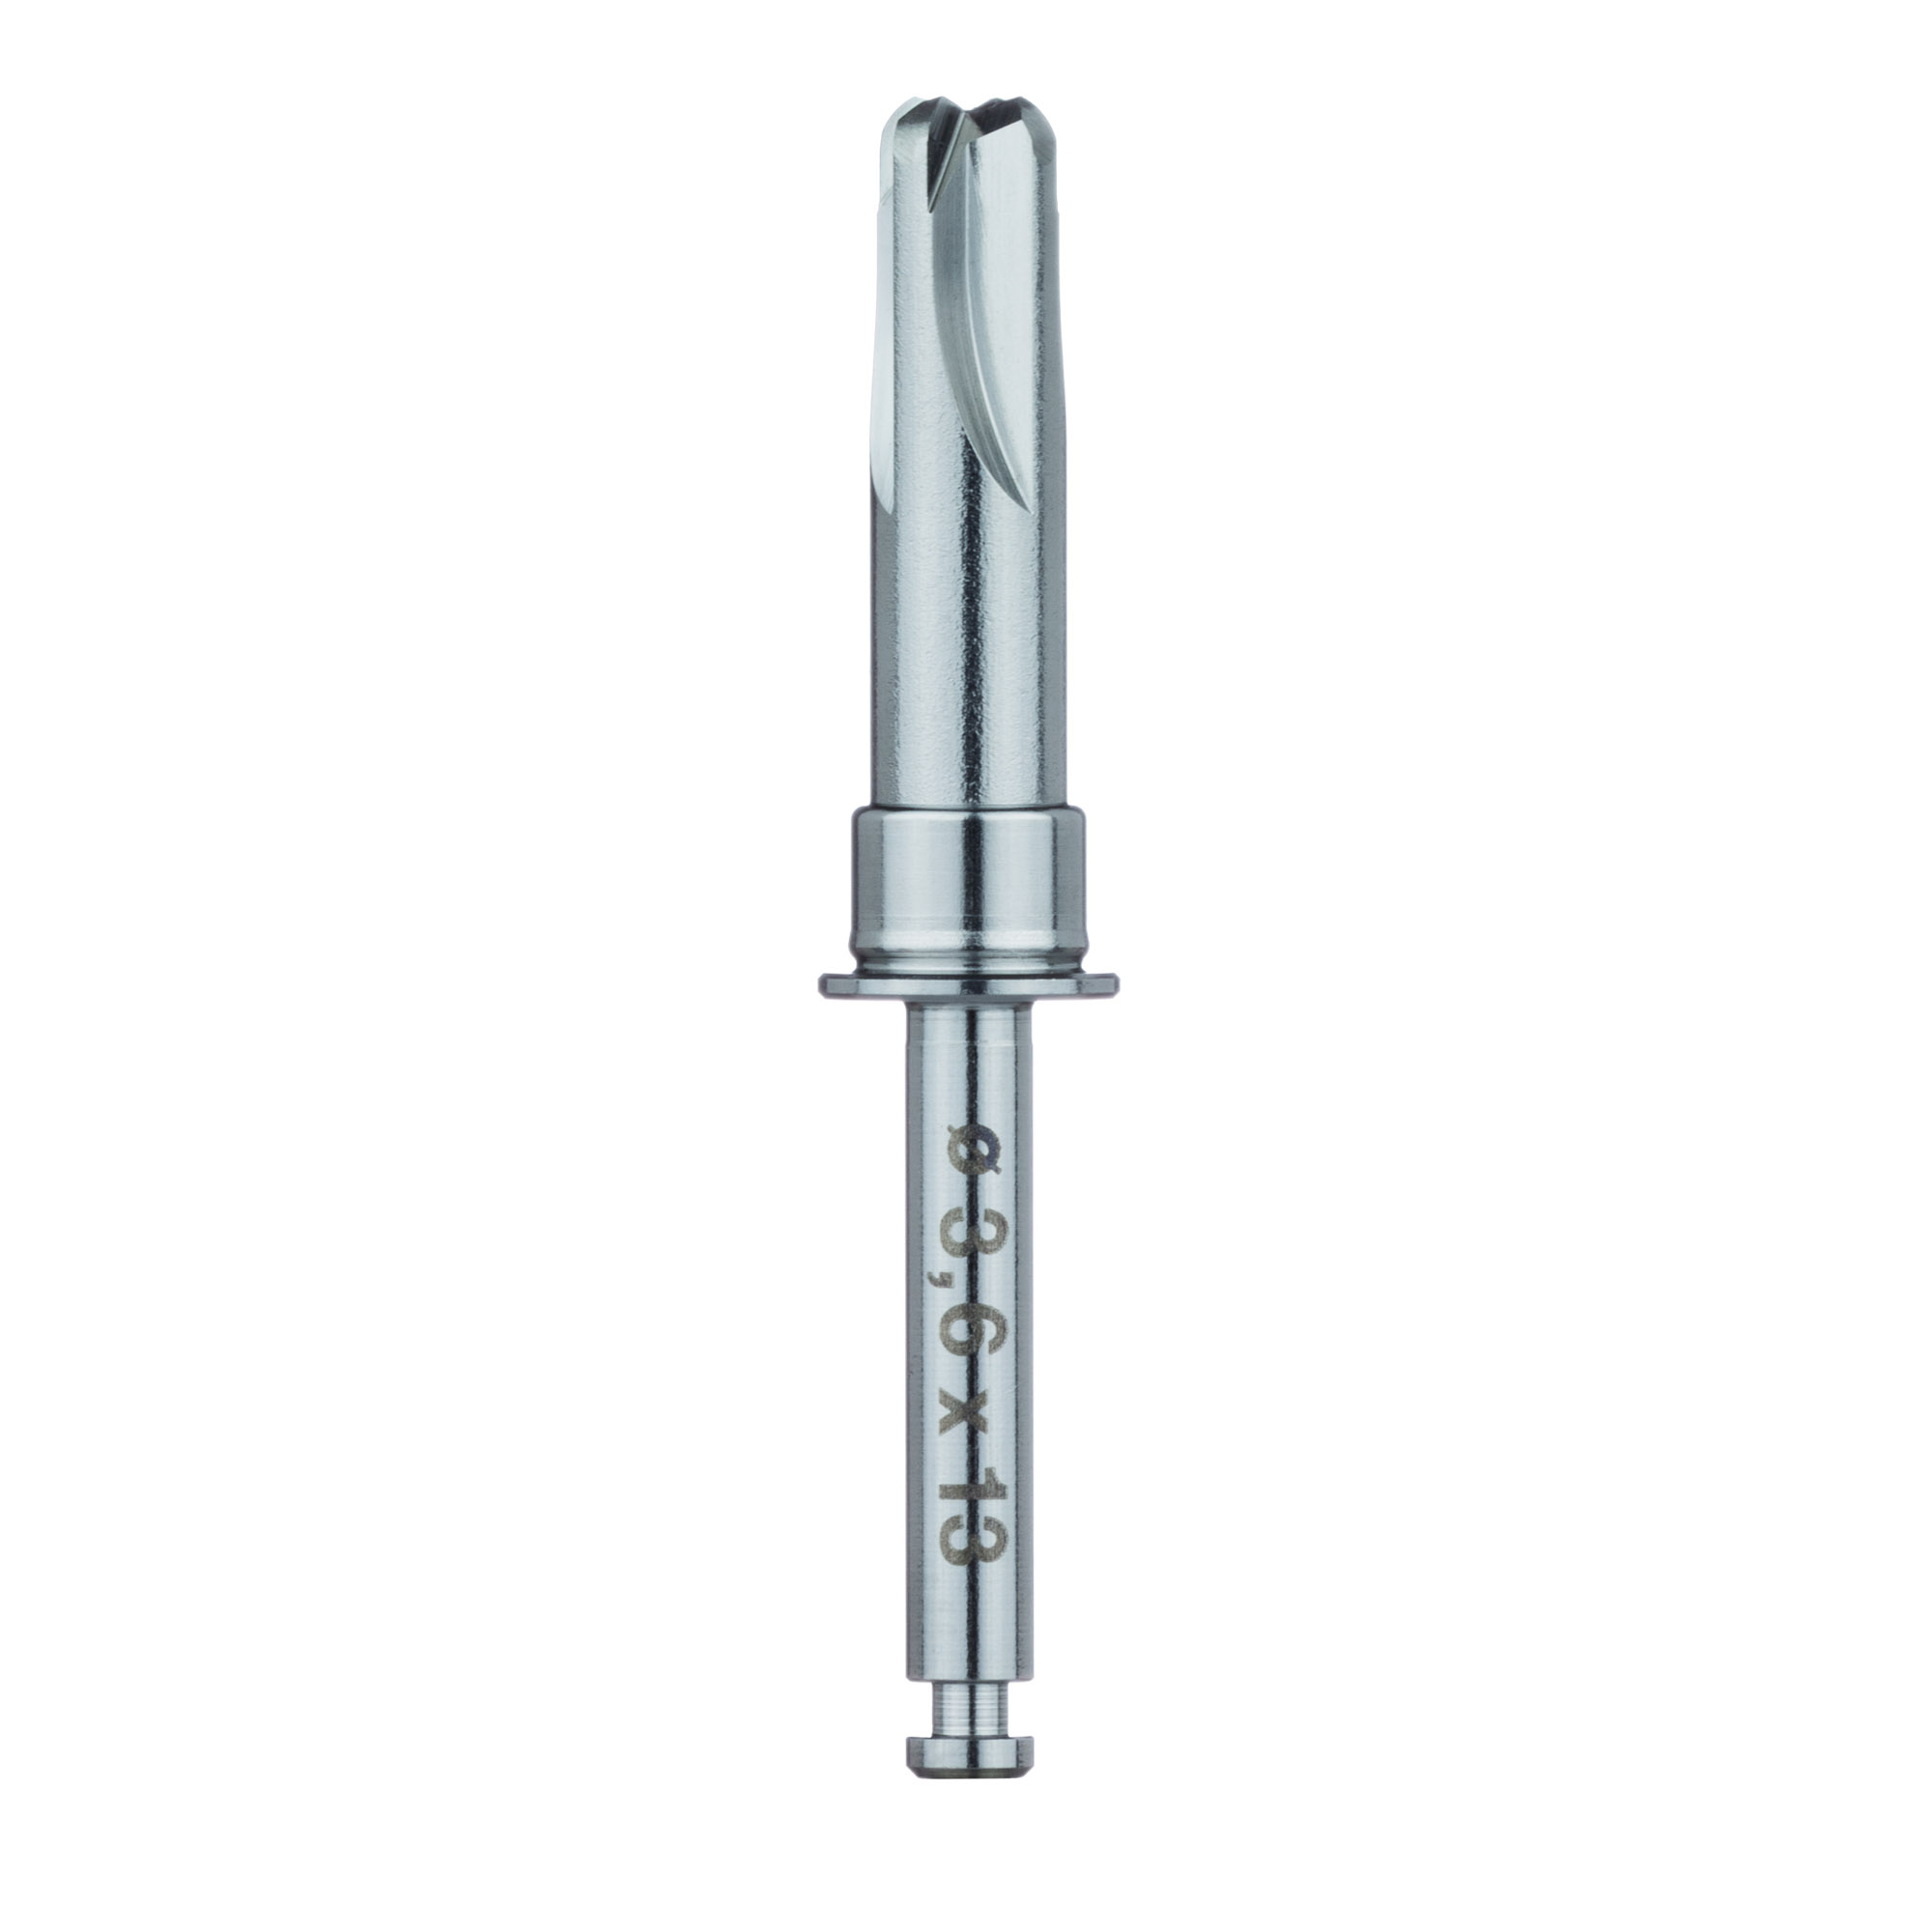 CL005 Surgery, Crestal Drill with Stop, 3.6mm Ø, RAXL